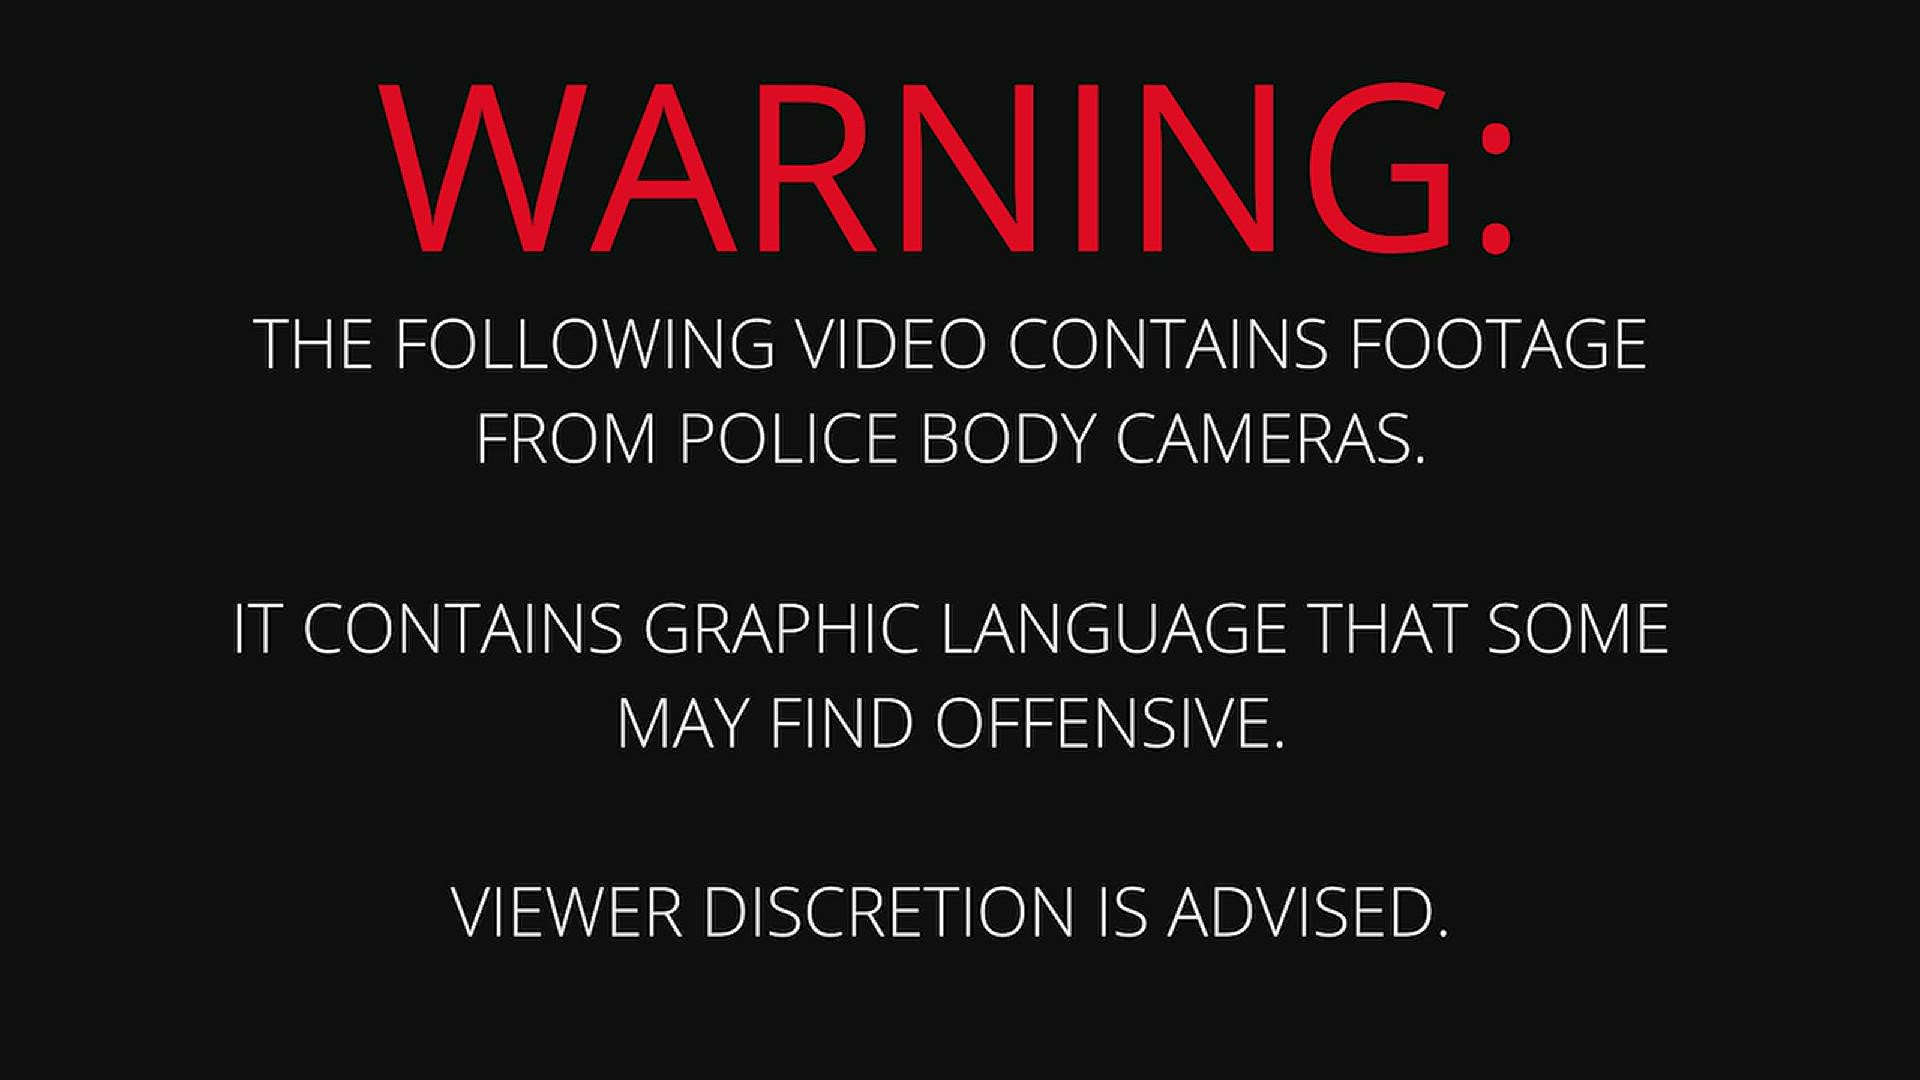 WARNING: This video contains graphic language that may be offensive to some. Viewer discretion is advised.